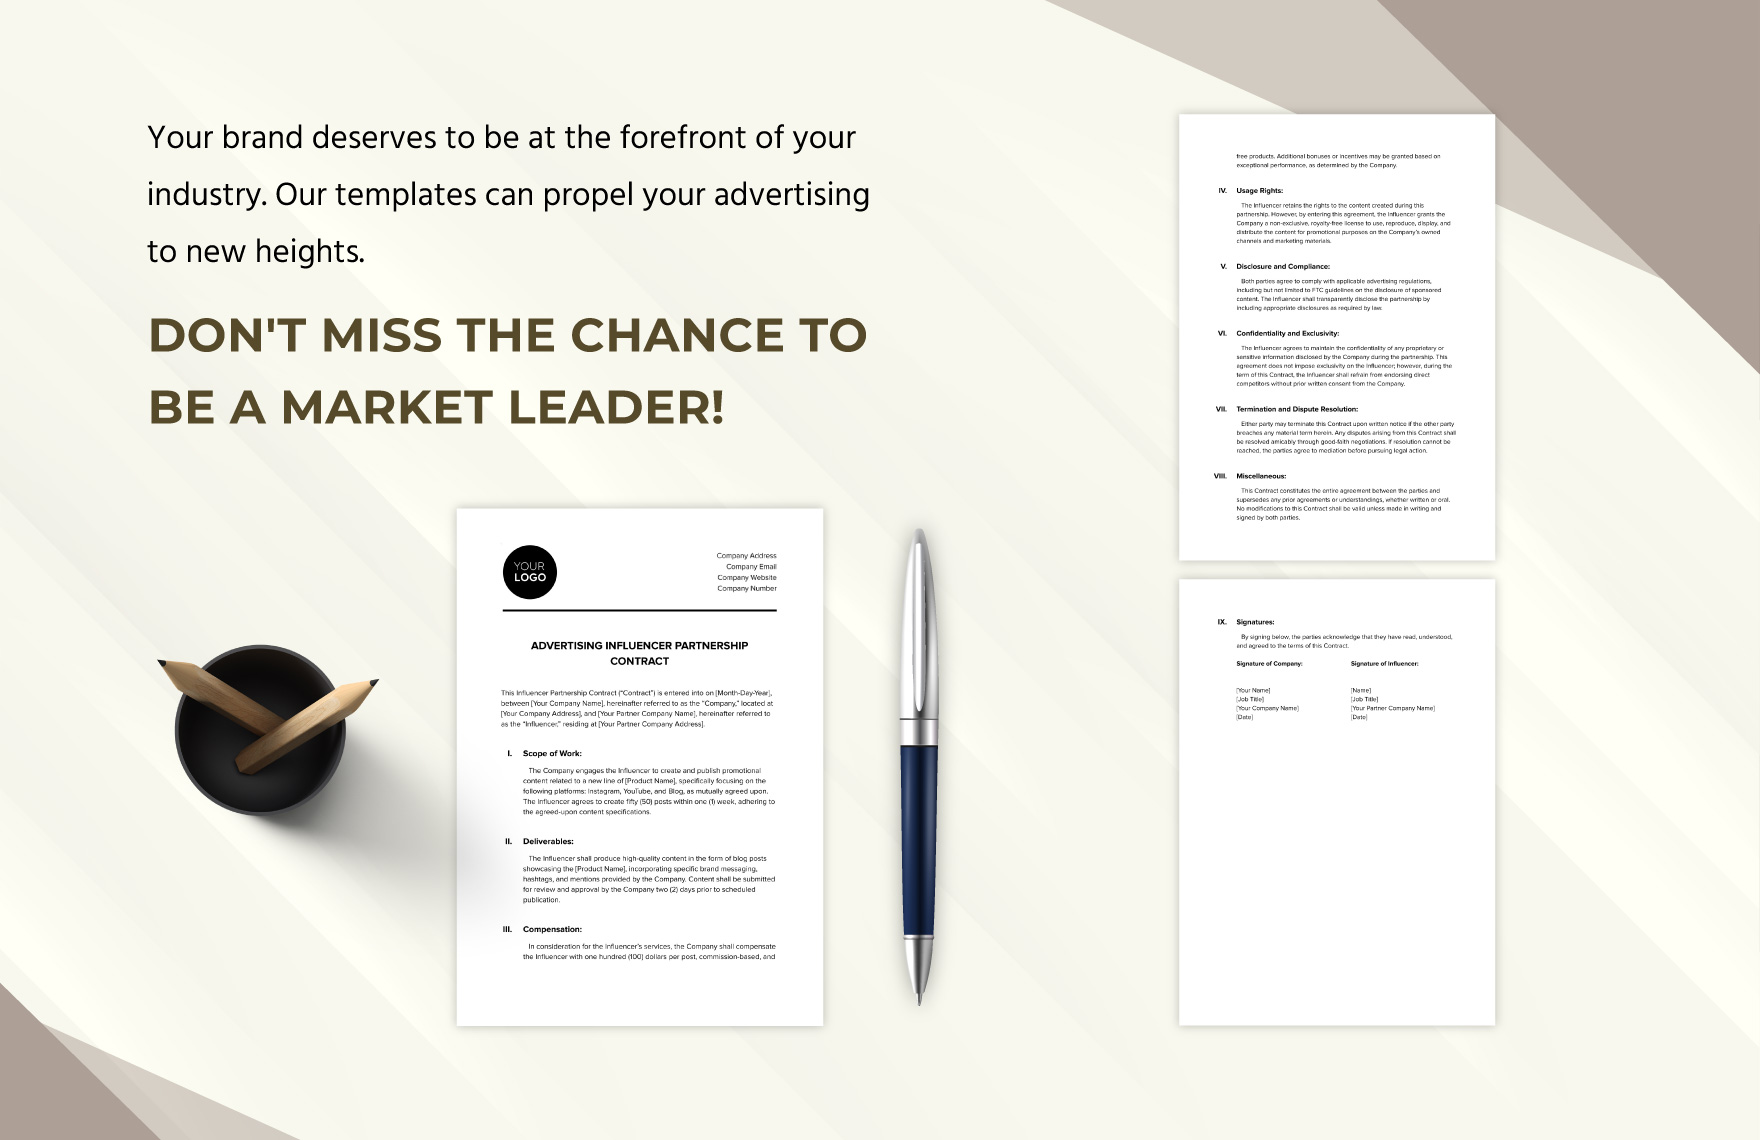 Advertising Influencer Partnership Contract Template